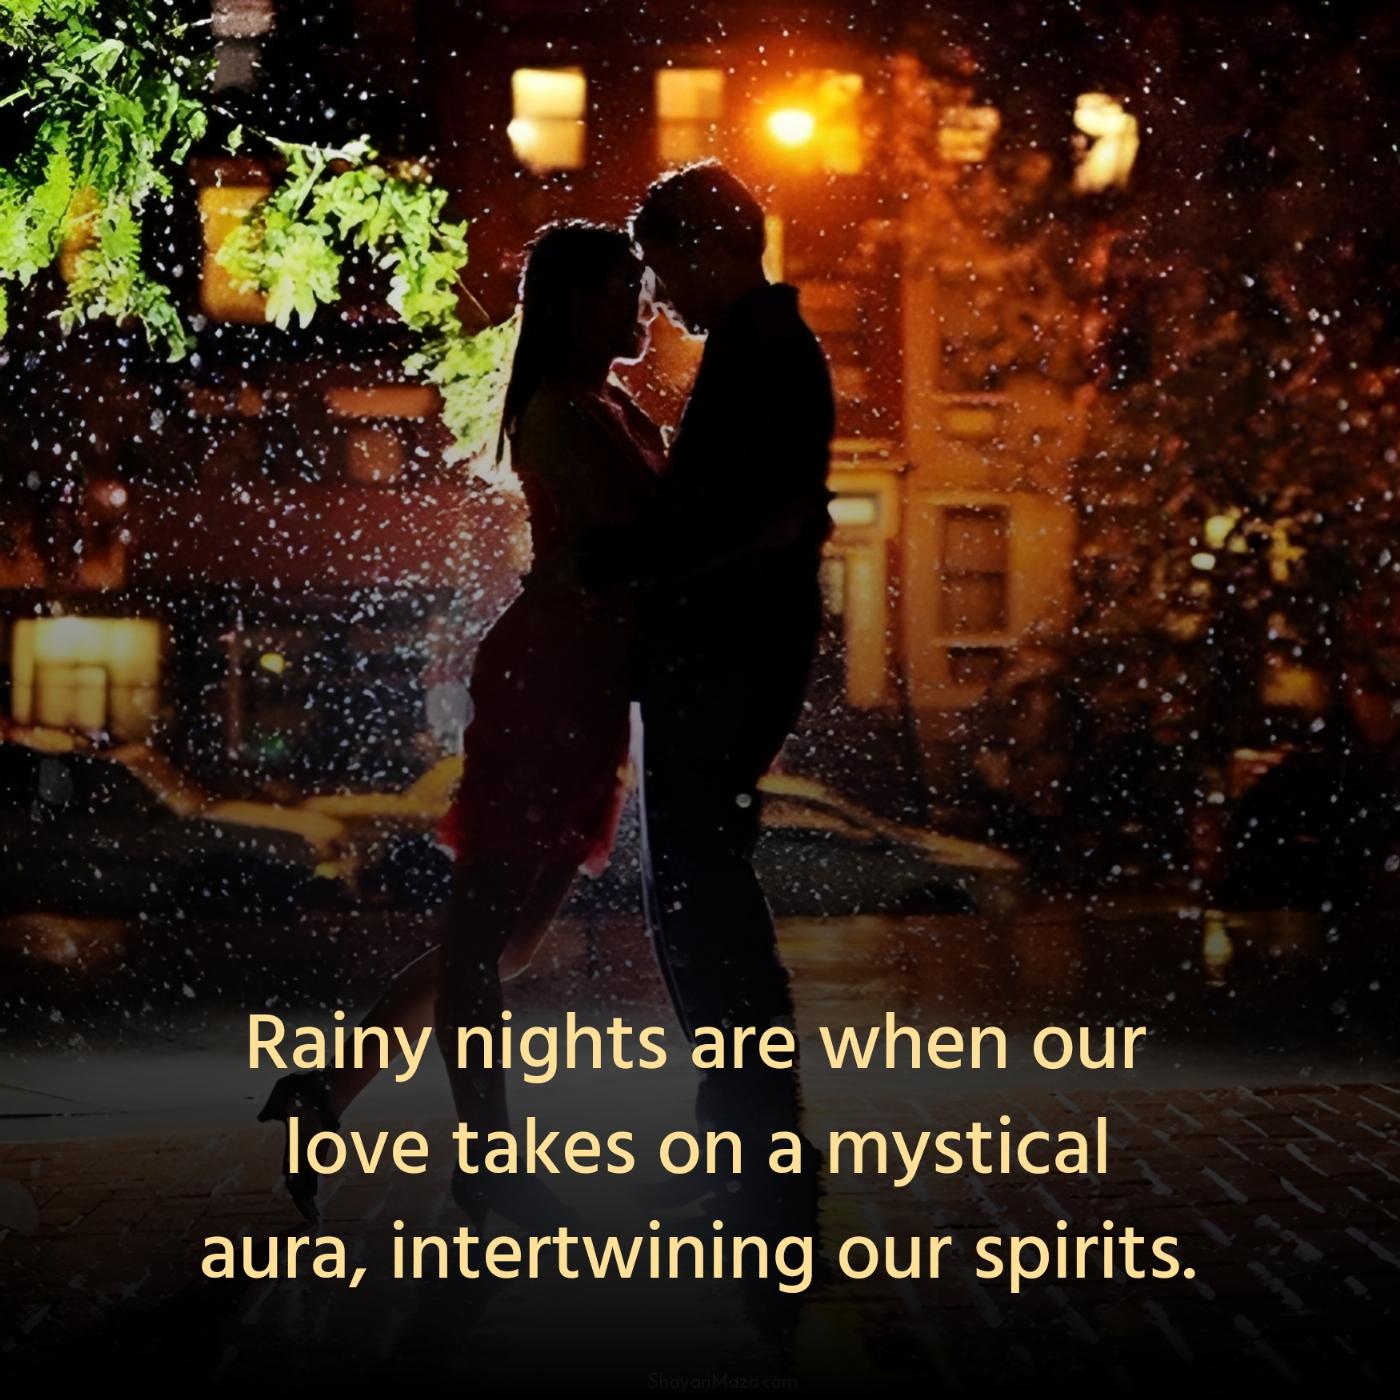 Rainy nights are when our love takes on a mystical aura